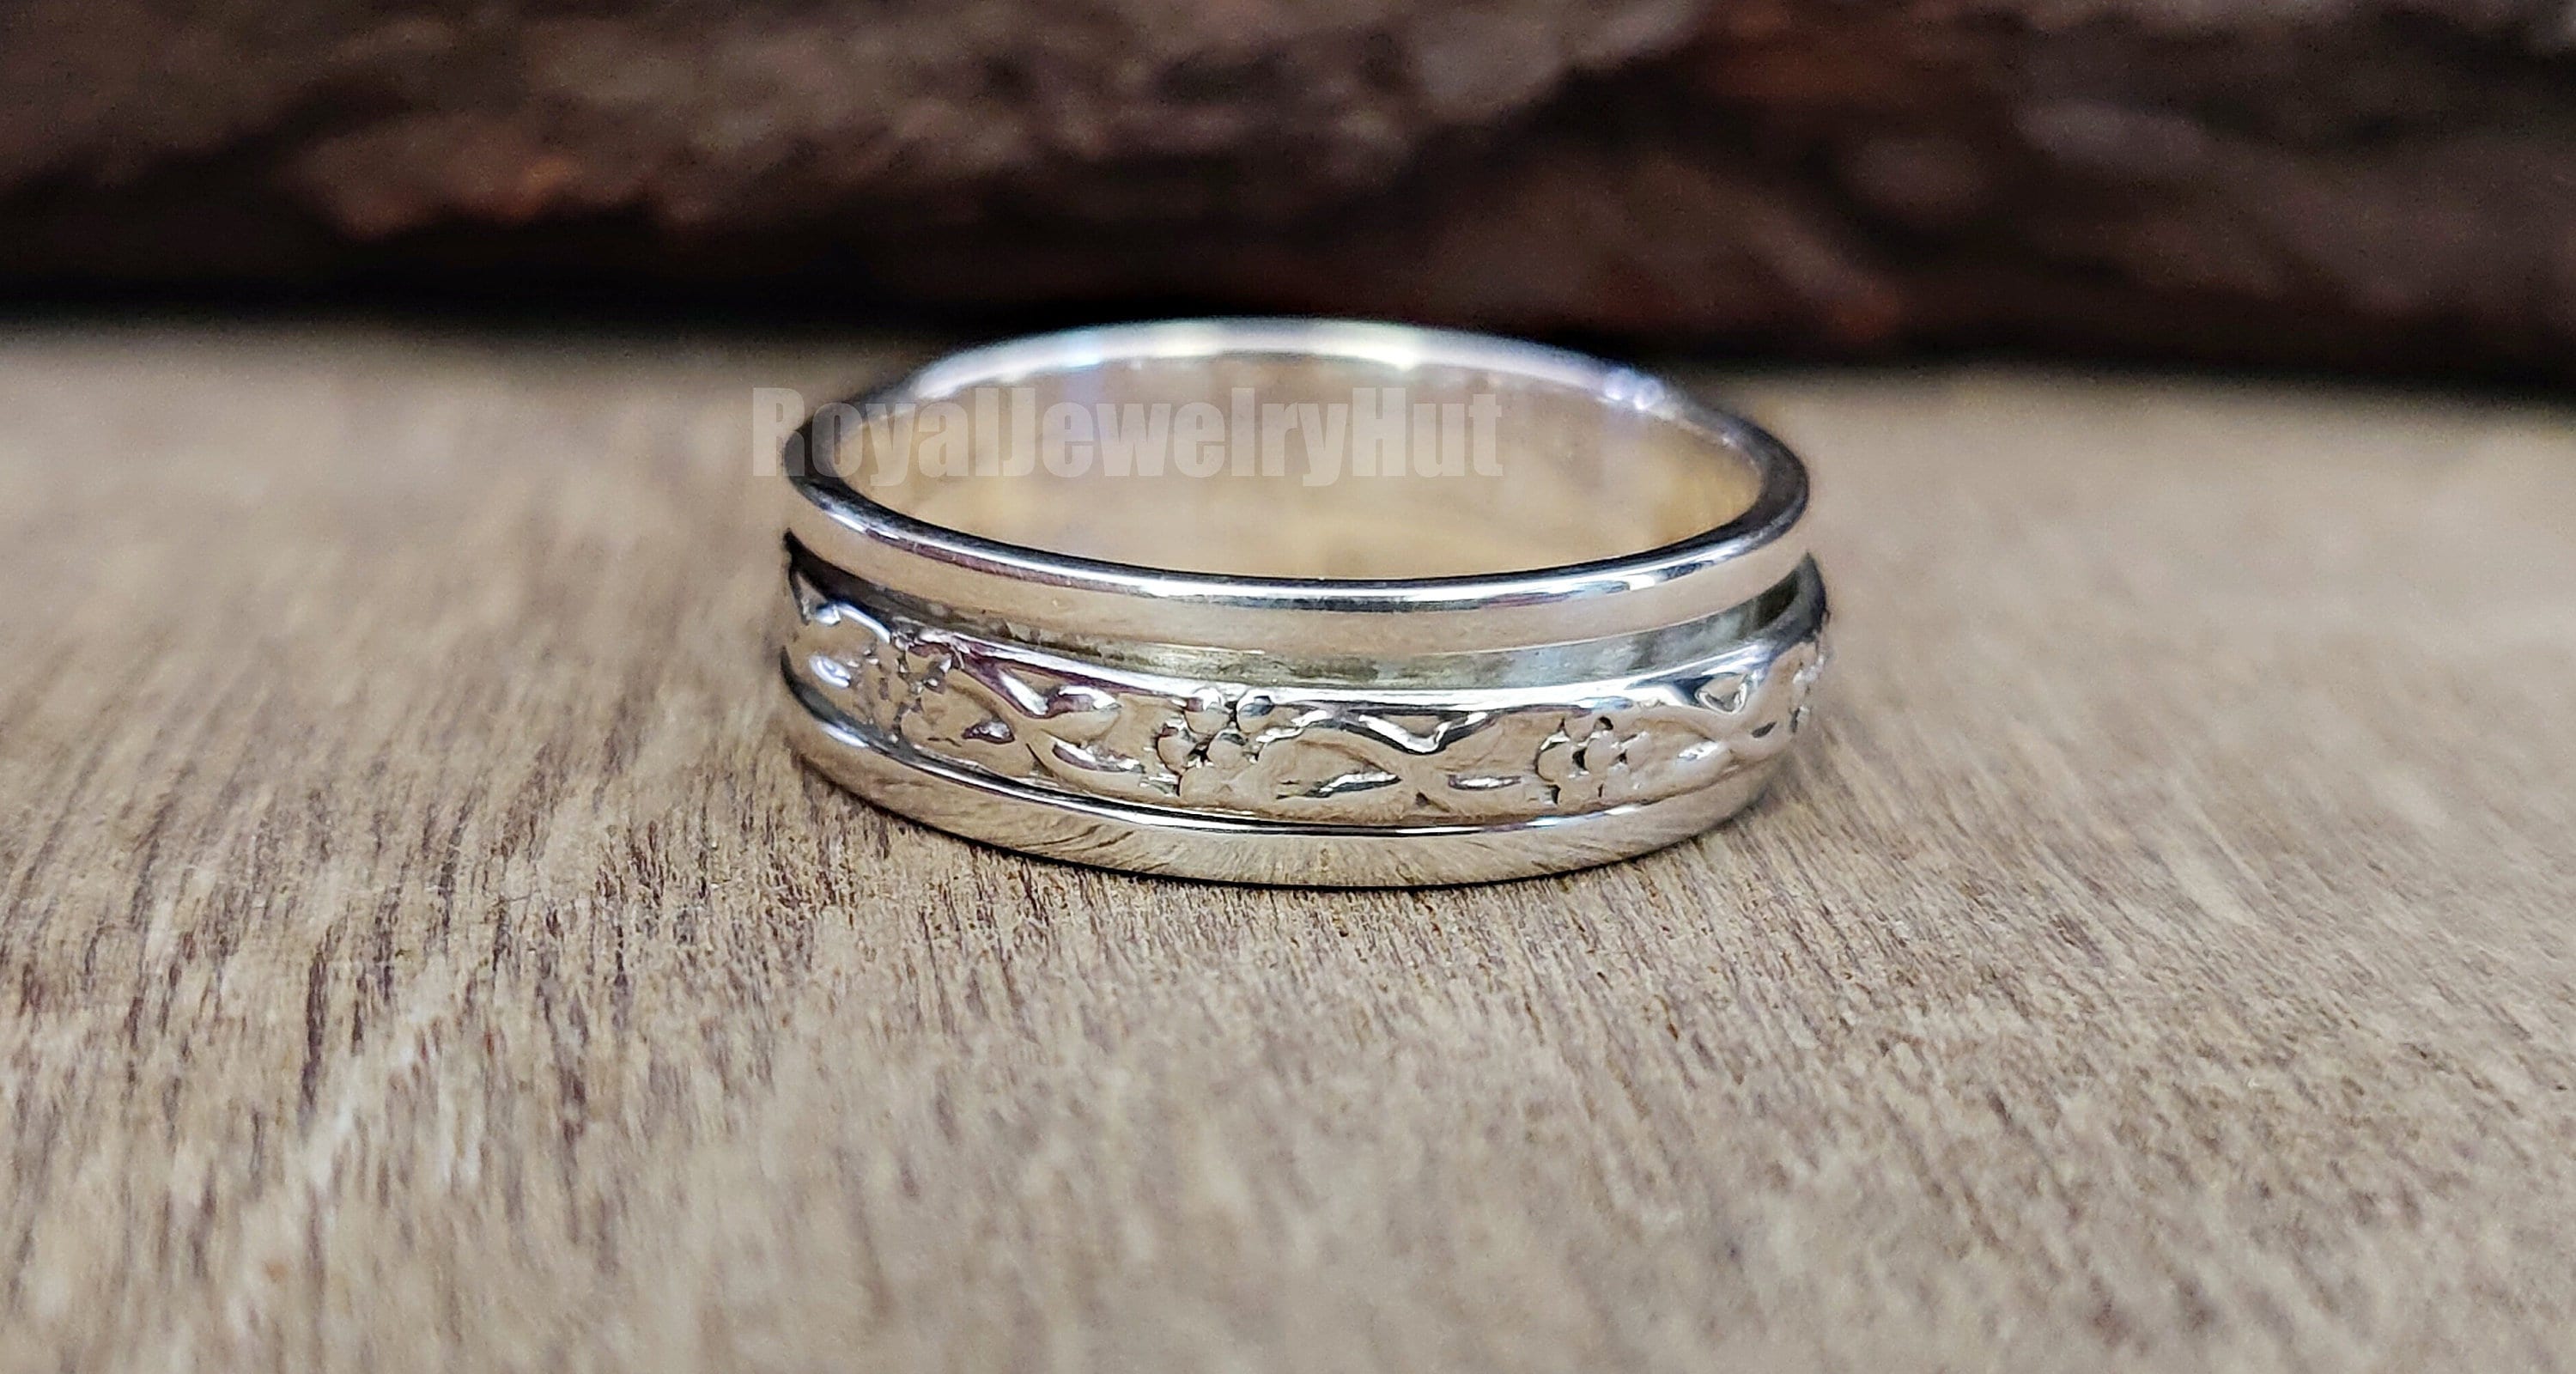 Flower 925 Silver Plated Meditation Spinner Ring US Size 11.75 R-16382